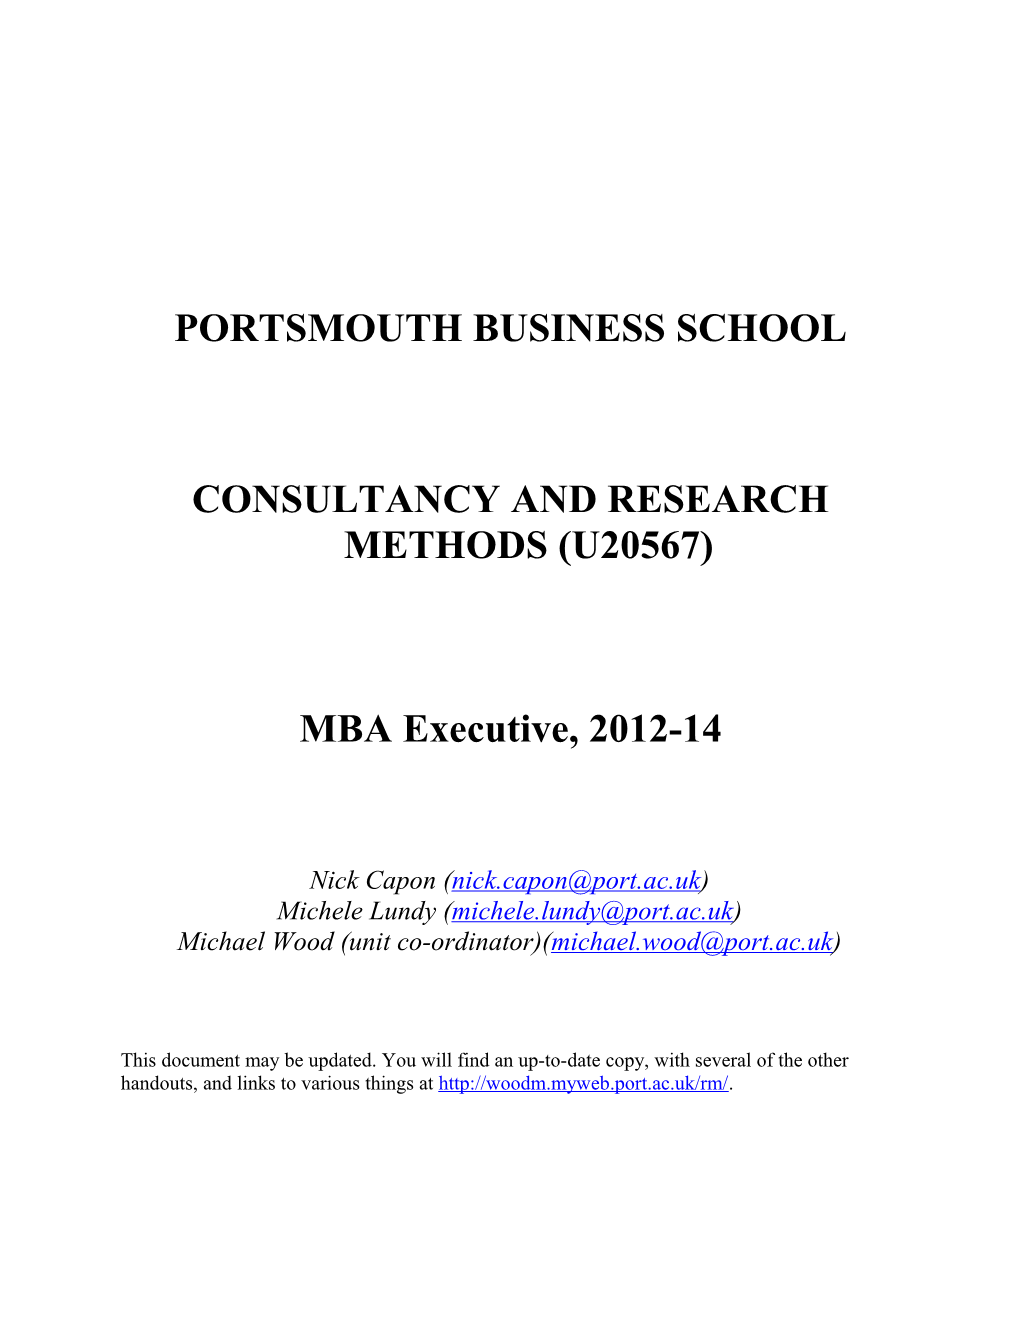 Consultancy and Research Methods (U20567)